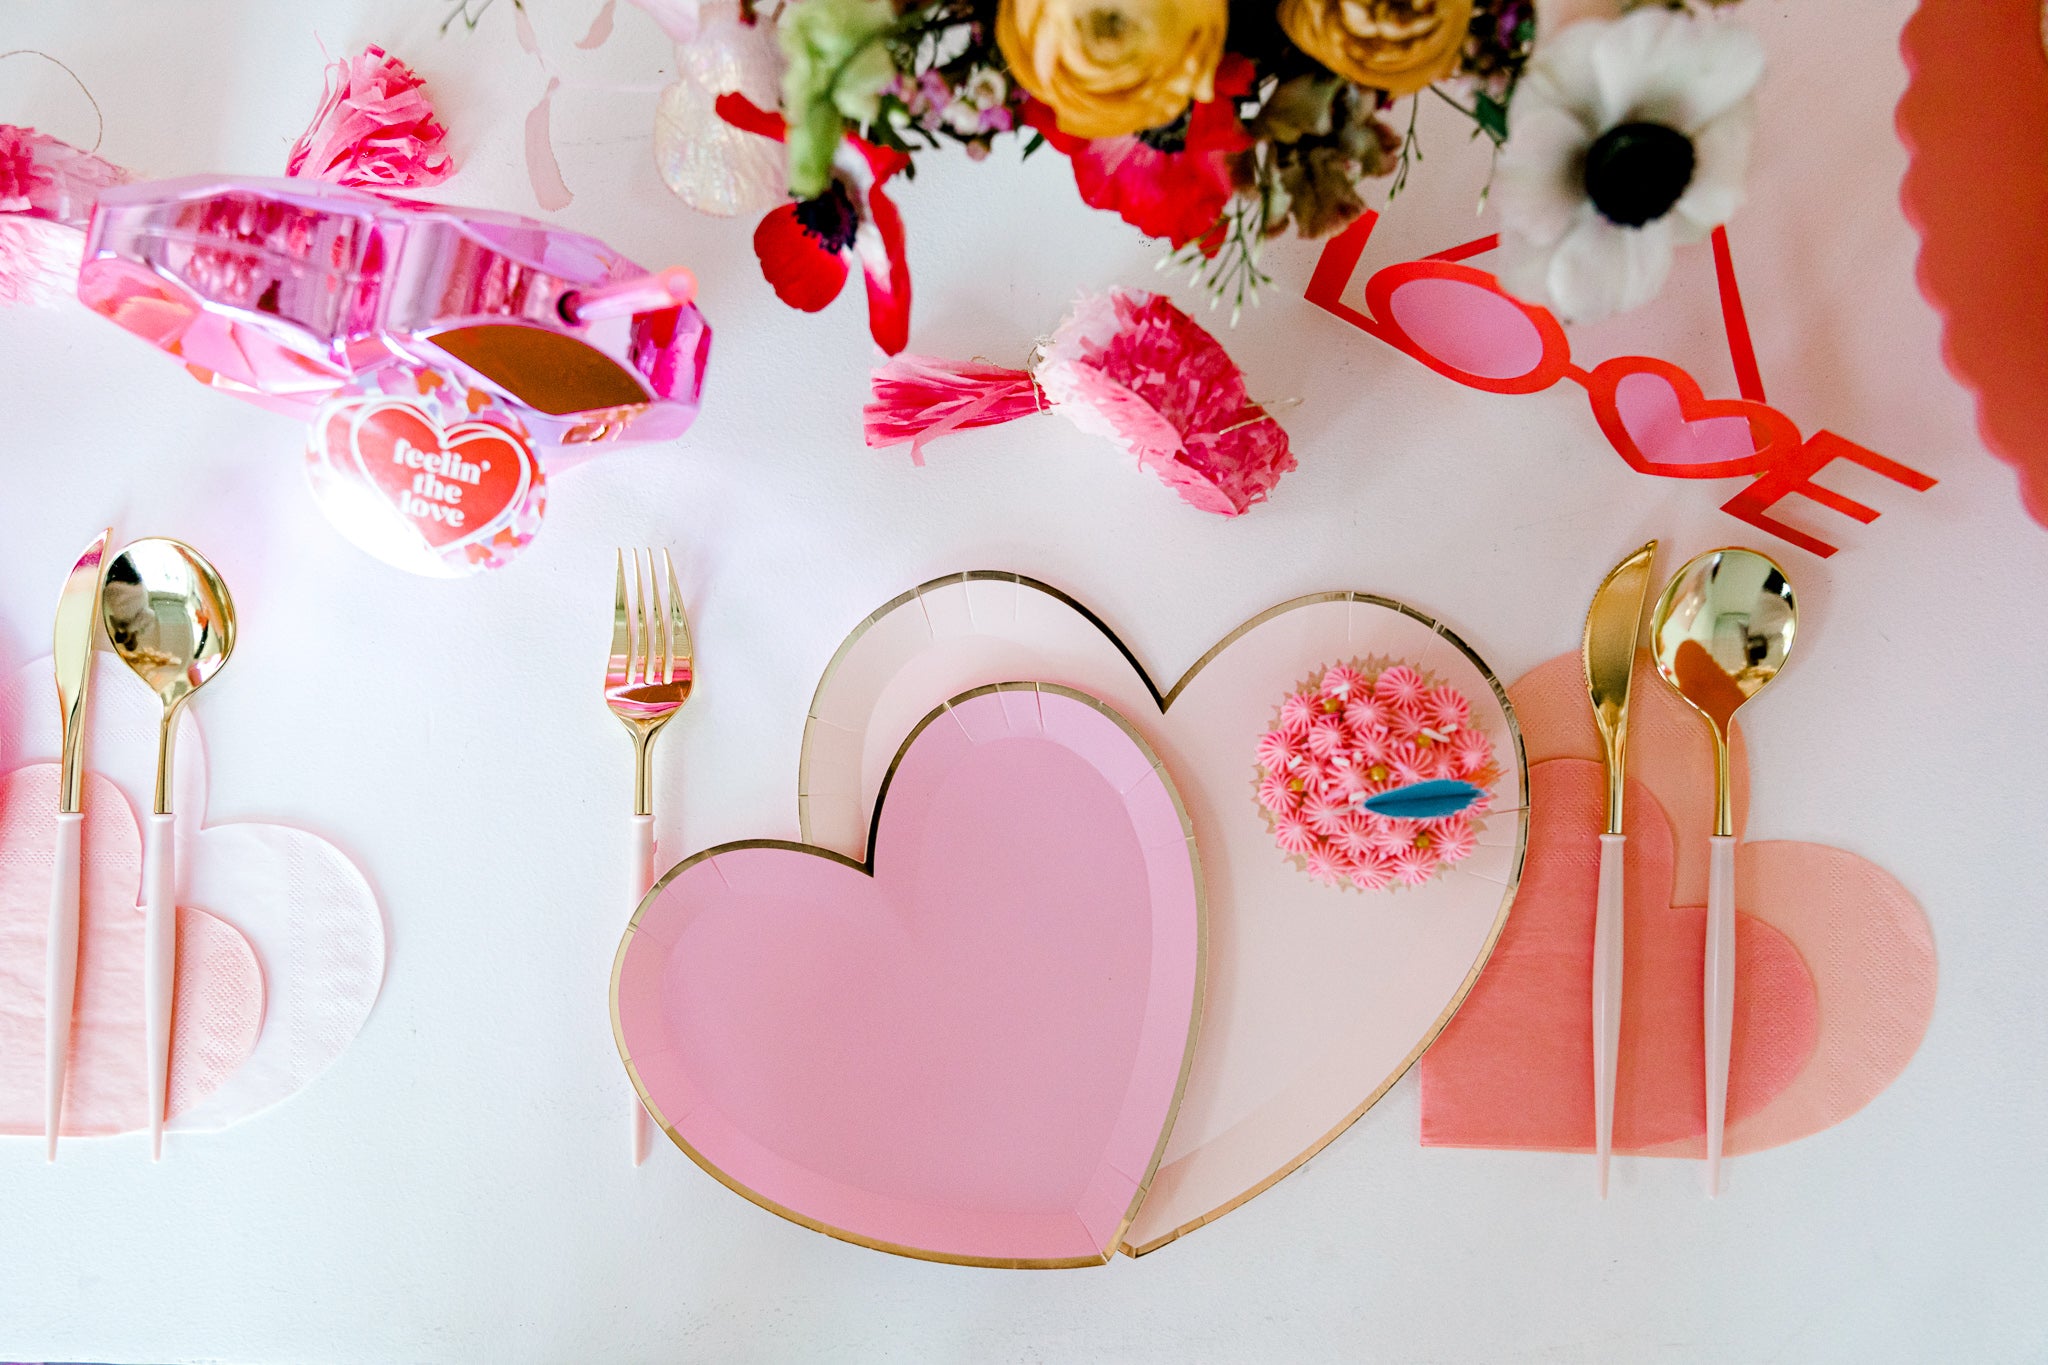 Pink table setting with heart shaped plates and napkins